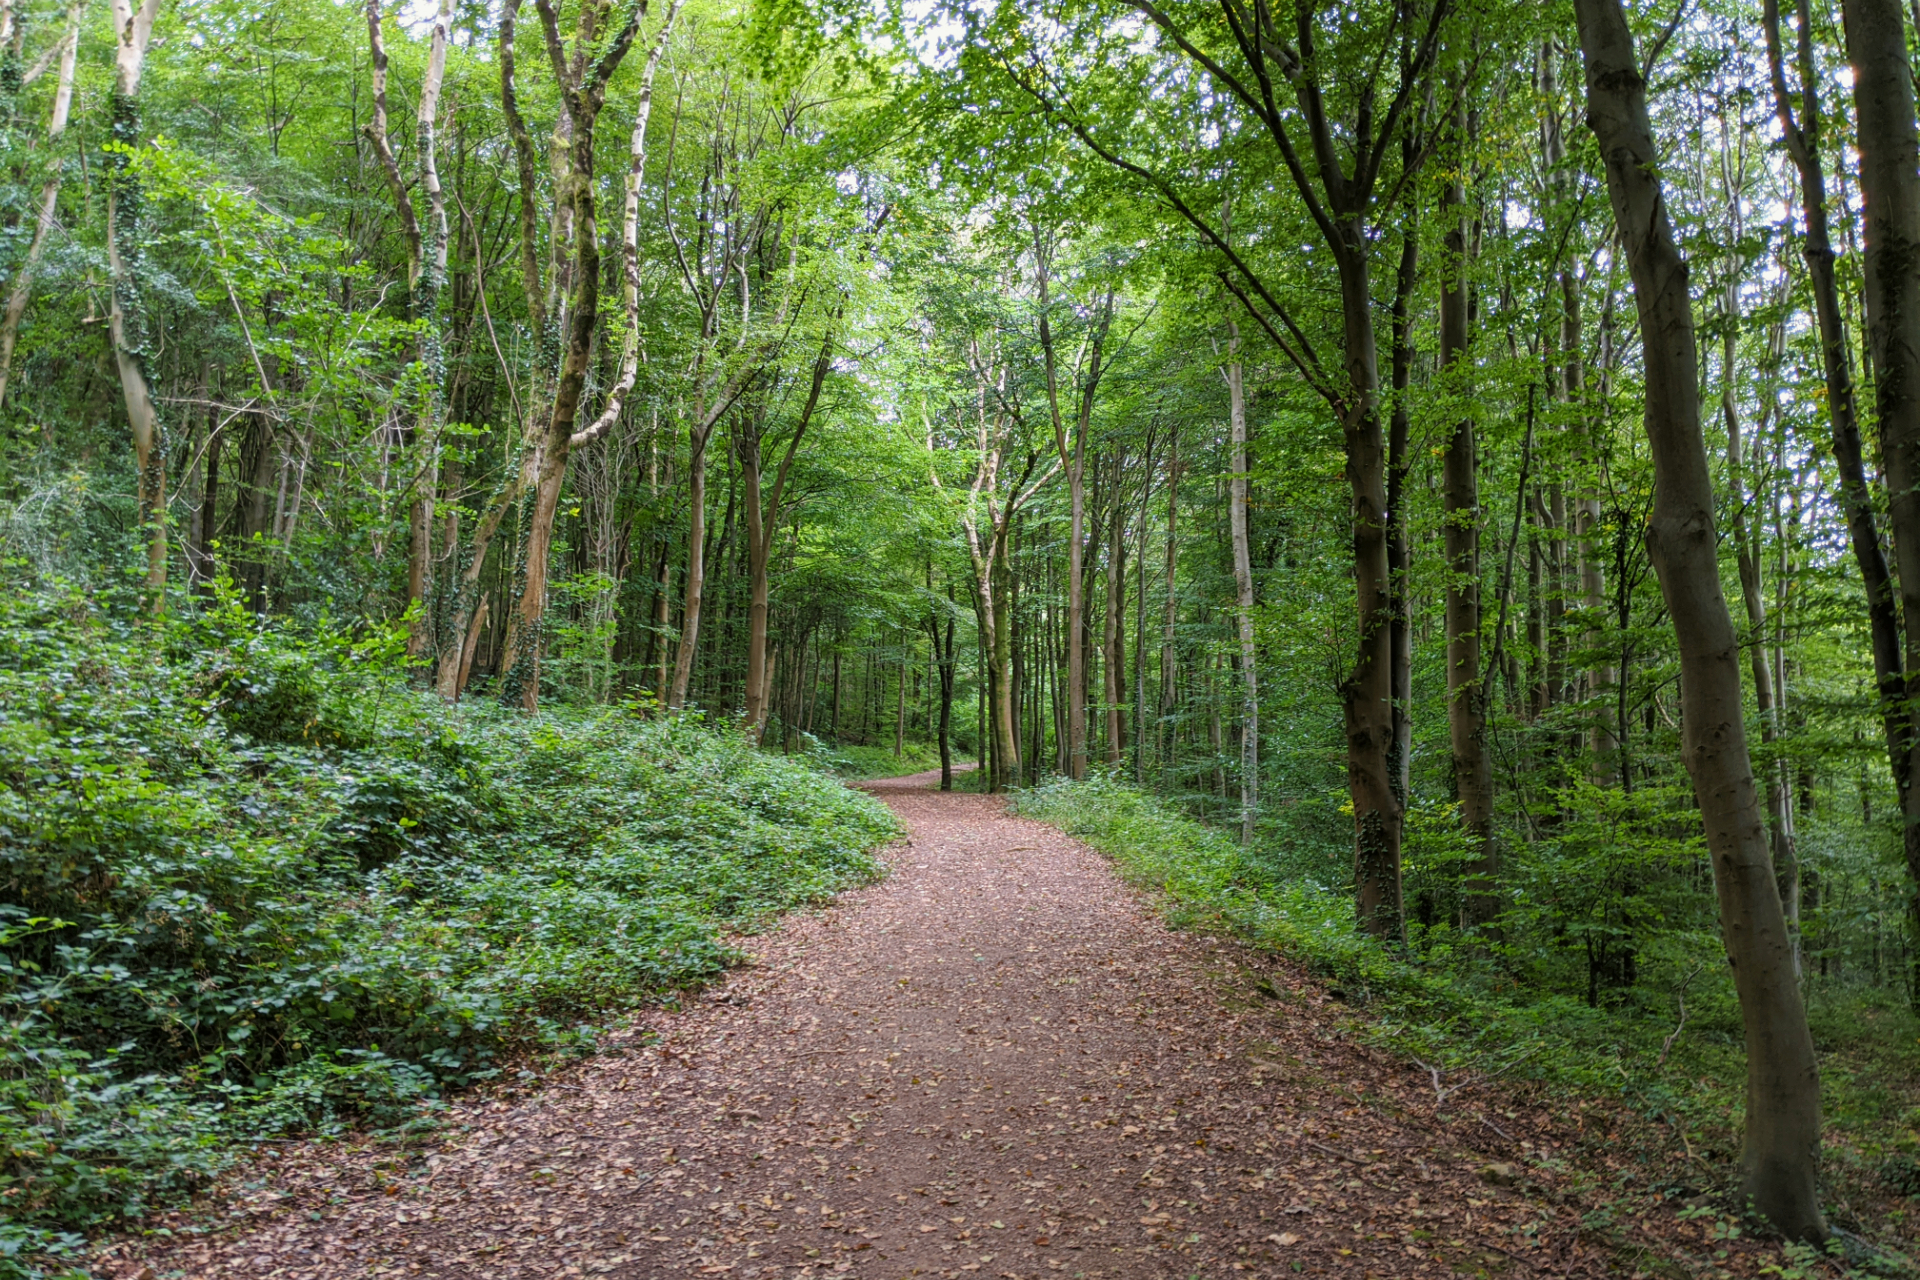 The first section of the Taff Trail is a forest bather's dream. Ⓒ Emma Sparks